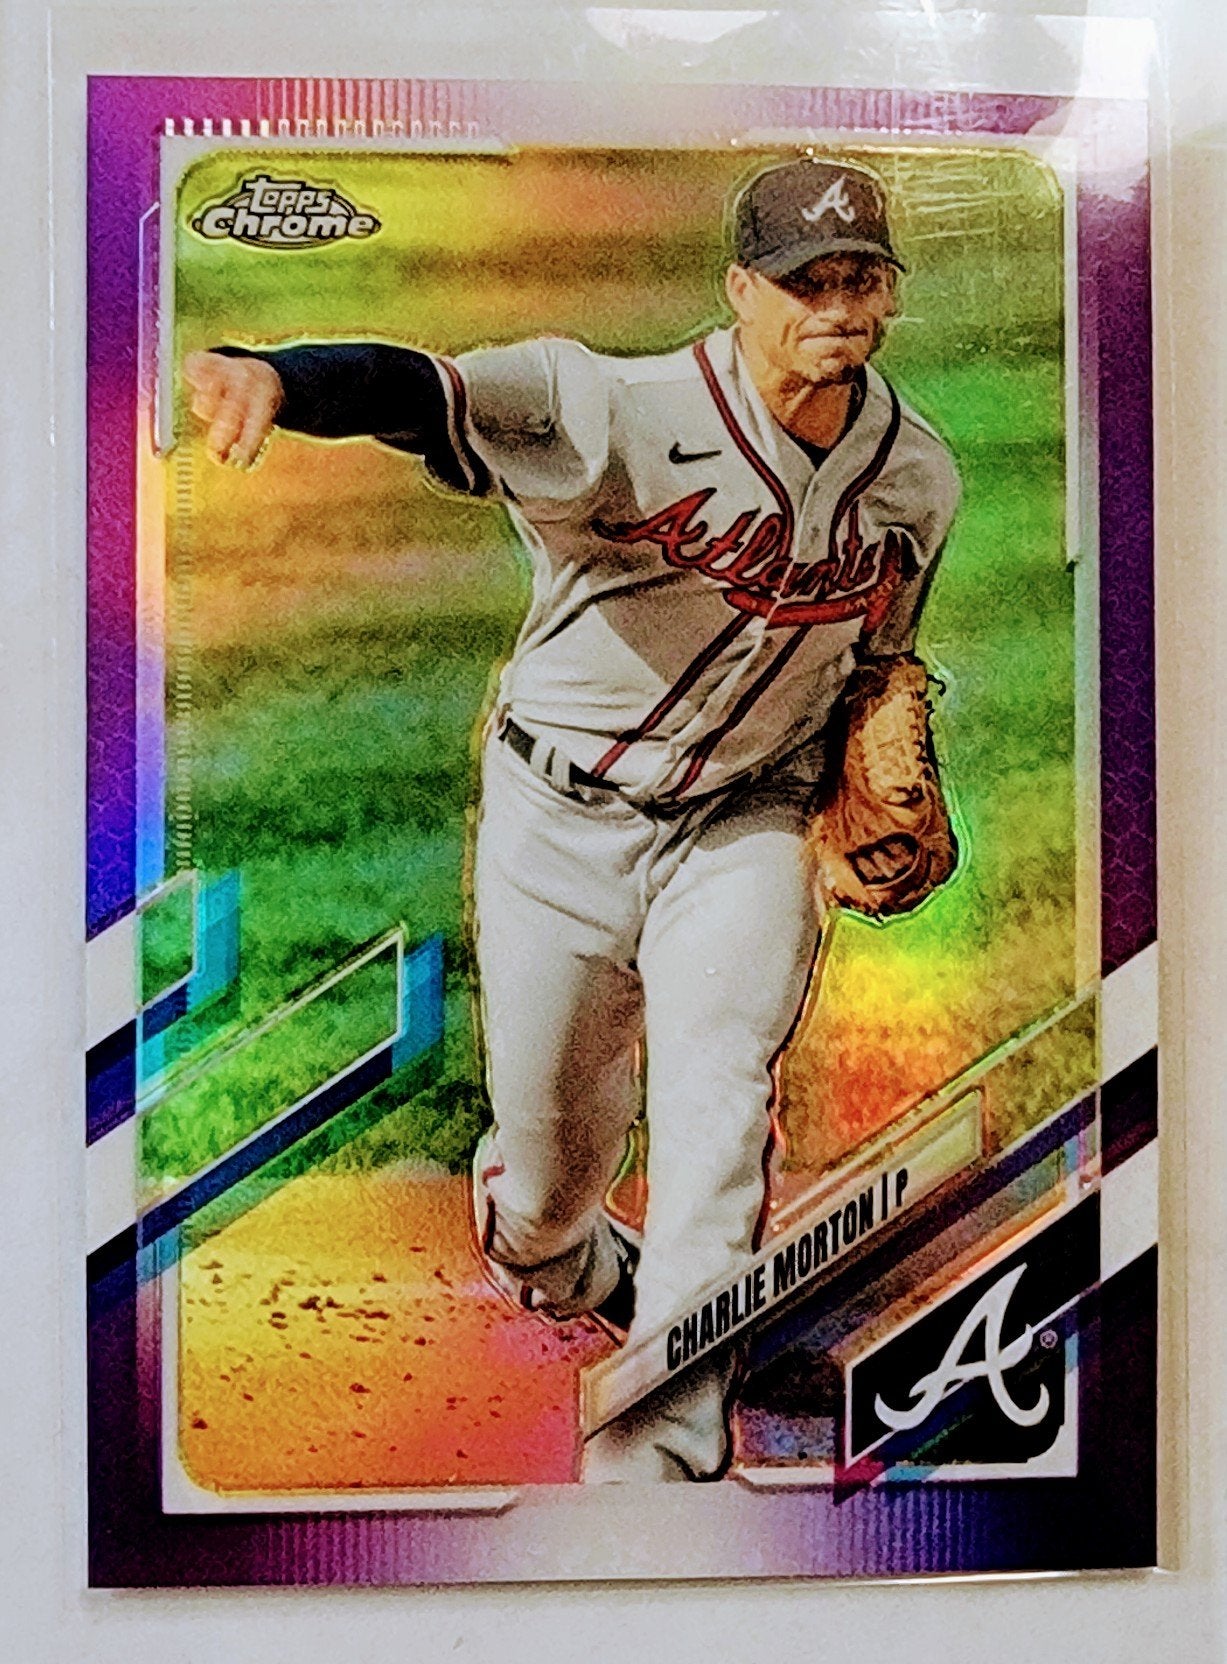 2021 Topps Chrome Update Charlie Morton Purple Refractor Baseball Card AVM1 simple Xclusive Collectibles   